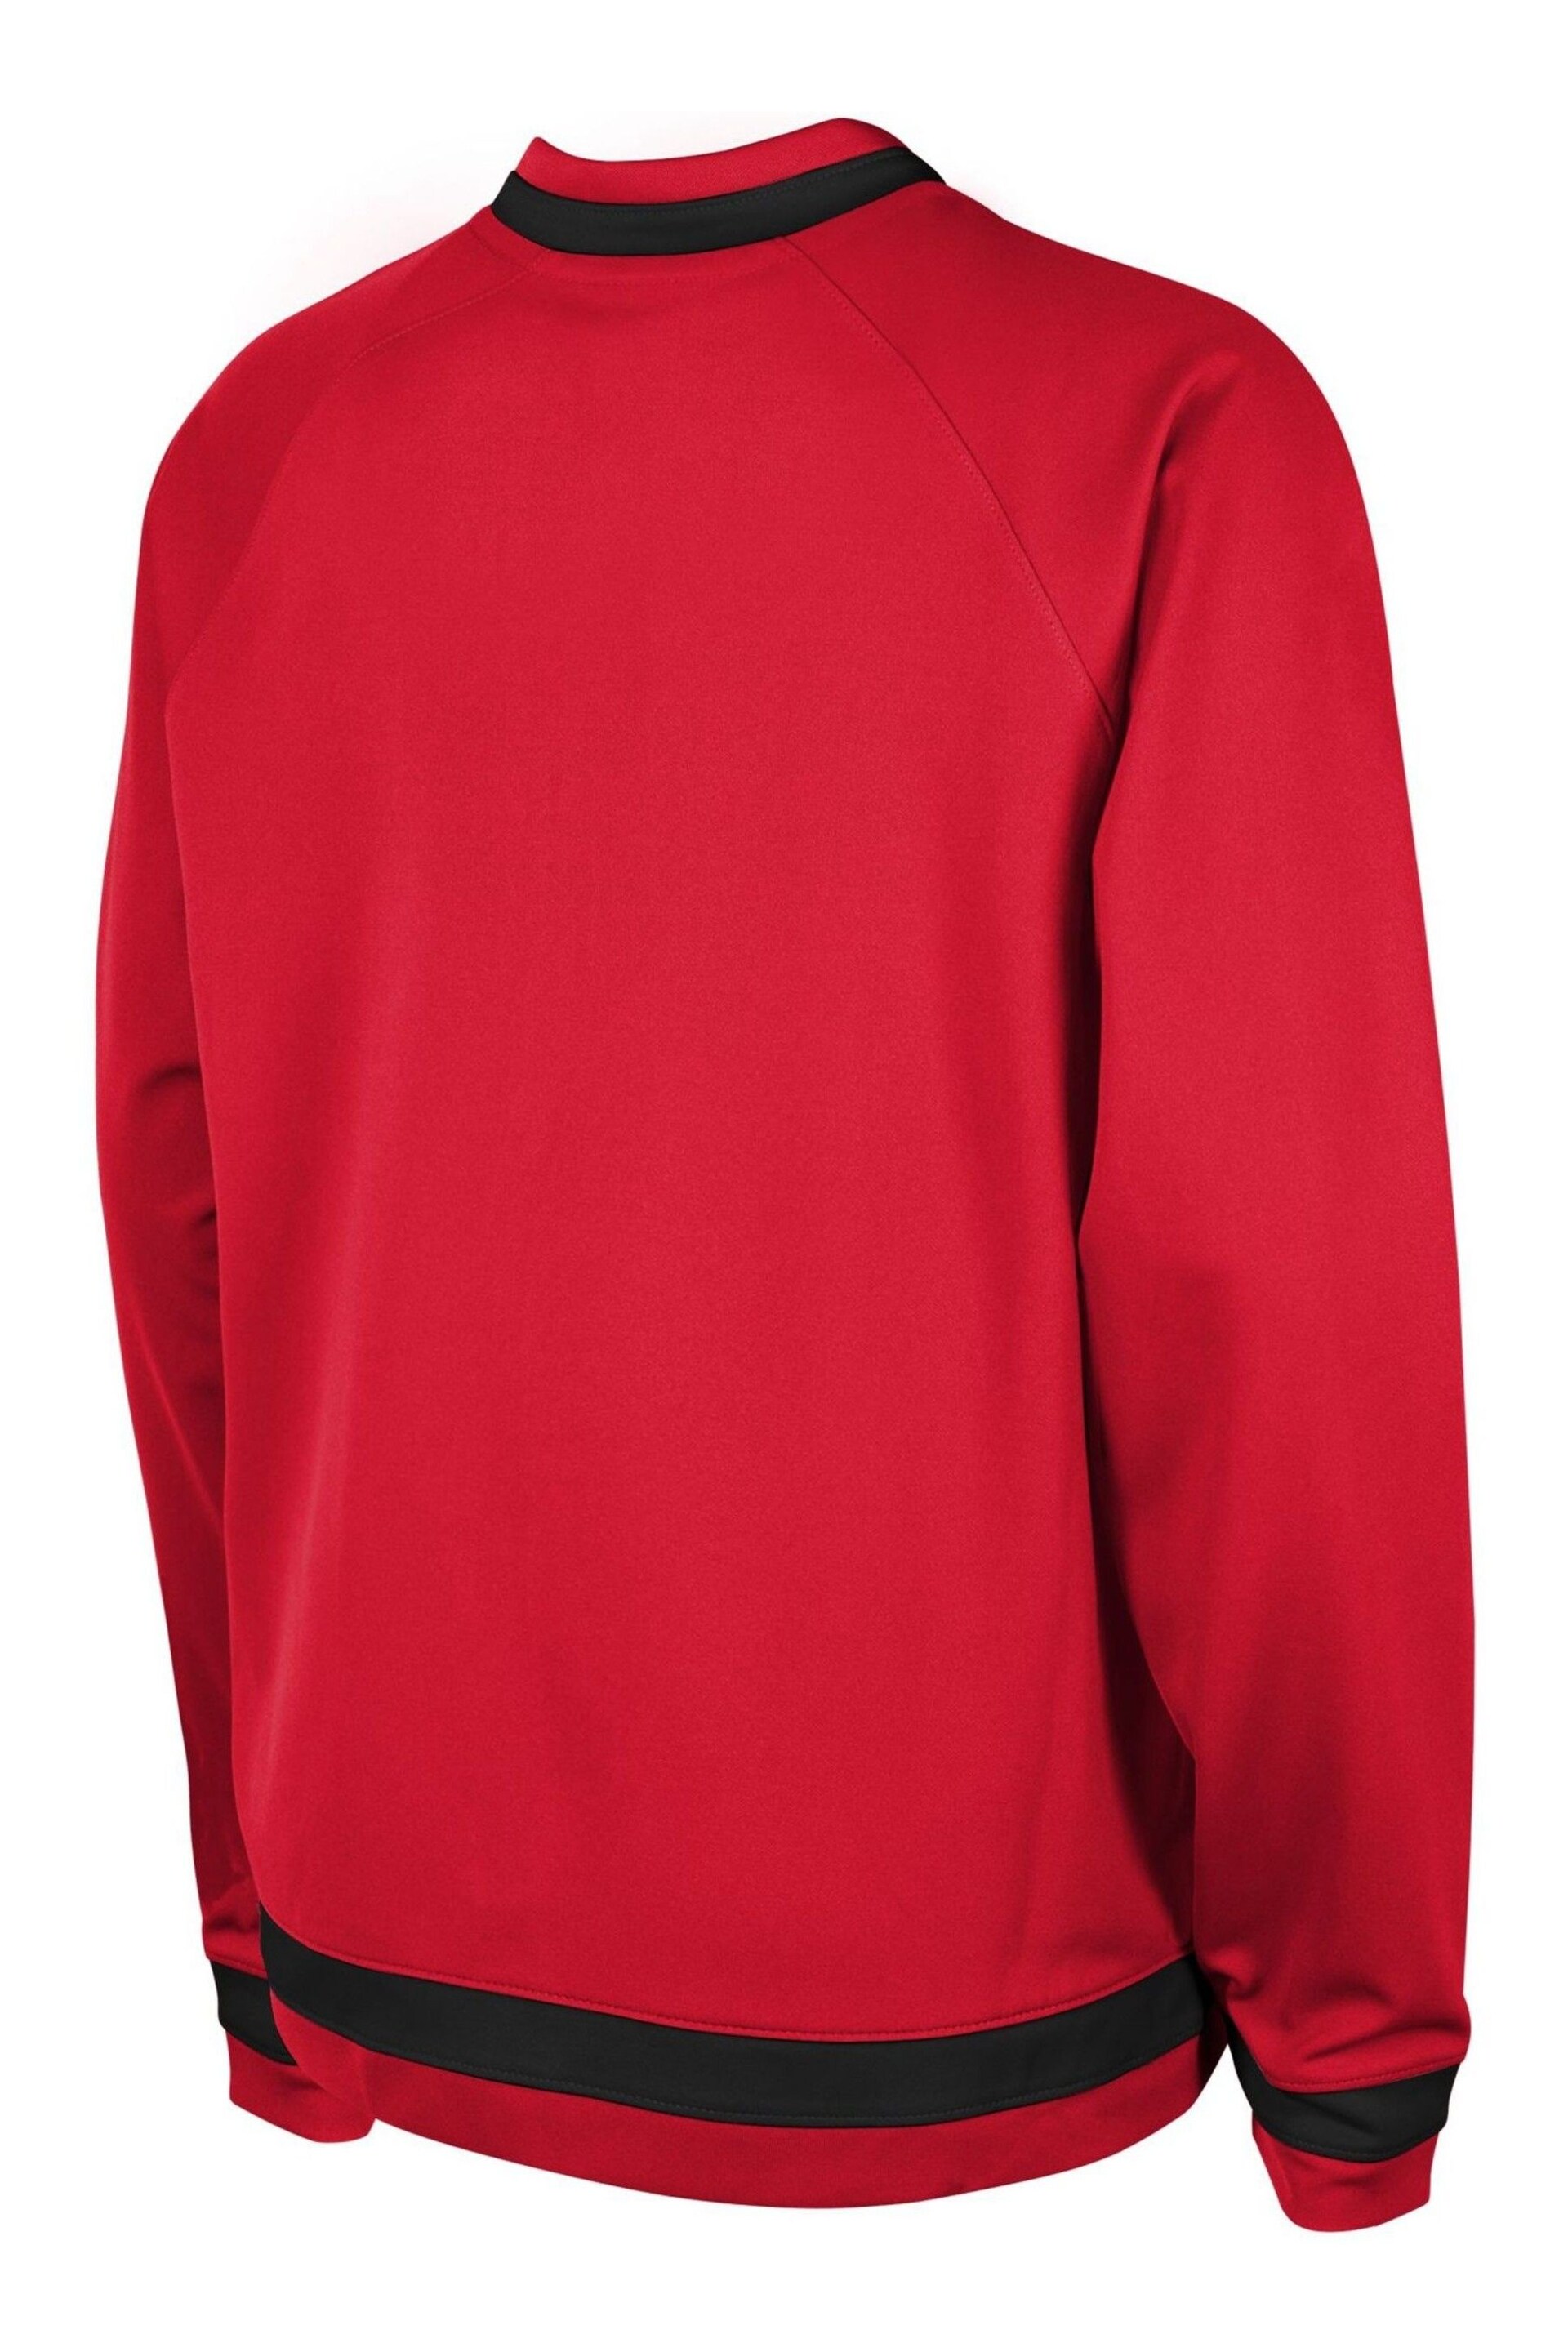 Fanatics Youth Red Chicago Bulls Courtside Tracksuit - Image 3 of 3